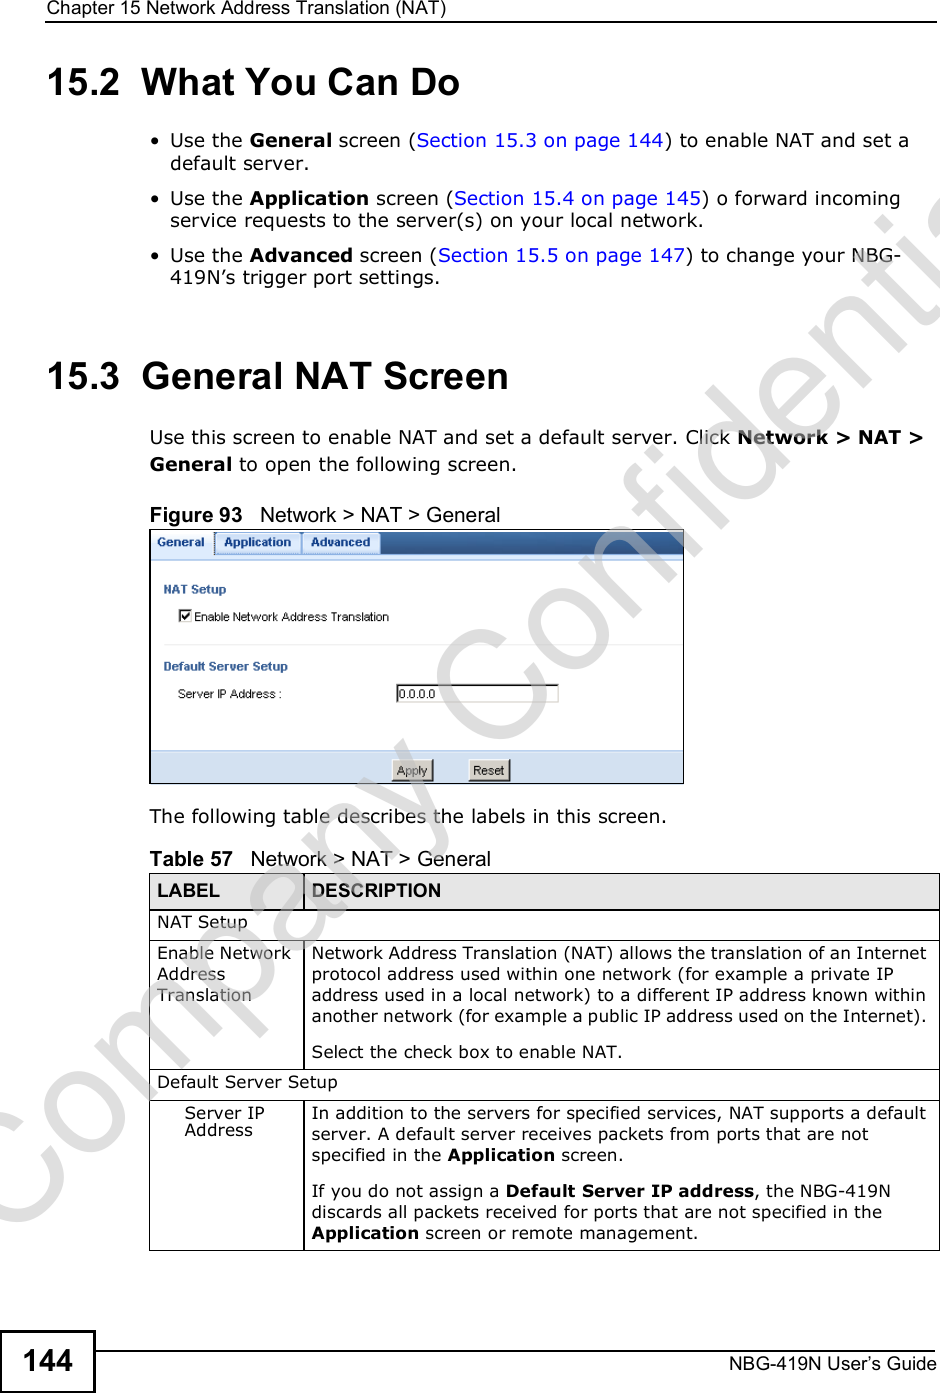 Chapter 15Network Address Translation (NAT)NBG-419N User s Guide14415.2  What You Can Do Use the General screen (Section 15.3 on page 144) to enable NAT and set a default server. Use the Application screen (Section 15.4 on page 145) o forward incoming service requests to the server(s) on your local network. Use the Advanced screen (Section 15.5 on page 147) to change your NBG-419N!s trigger port settings.15.3  General NAT ScreenUse this screen to enable NAT and set a default server. Click Network &gt; NAT &gt; General to open the following screen.Figure 93   Network &gt; NAT &gt; General The following table describes the labels in this screen.Table 57   Network &gt; NAT &gt; GeneralLABEL DESCRIPTIONNAT SetupEnable Network Address TranslationNetwork Address Translation (NAT) allows the translation of an Internet protocol address used within one network (for example a private IP address used in a local network) to a different IP address known within another network (for example a public IP address used on the Internet). Select the check box to enable NAT.Default Server SetupServer IP AddressIn addition to the servers for specified services, NAT supports a default server. A default server receives packets from ports that are not specified in the Application screen. If you do not assign a Default Server IP address, the NBG-419N discards all packets received for ports that are not specified in the Application screen or remote management.Company Confidential